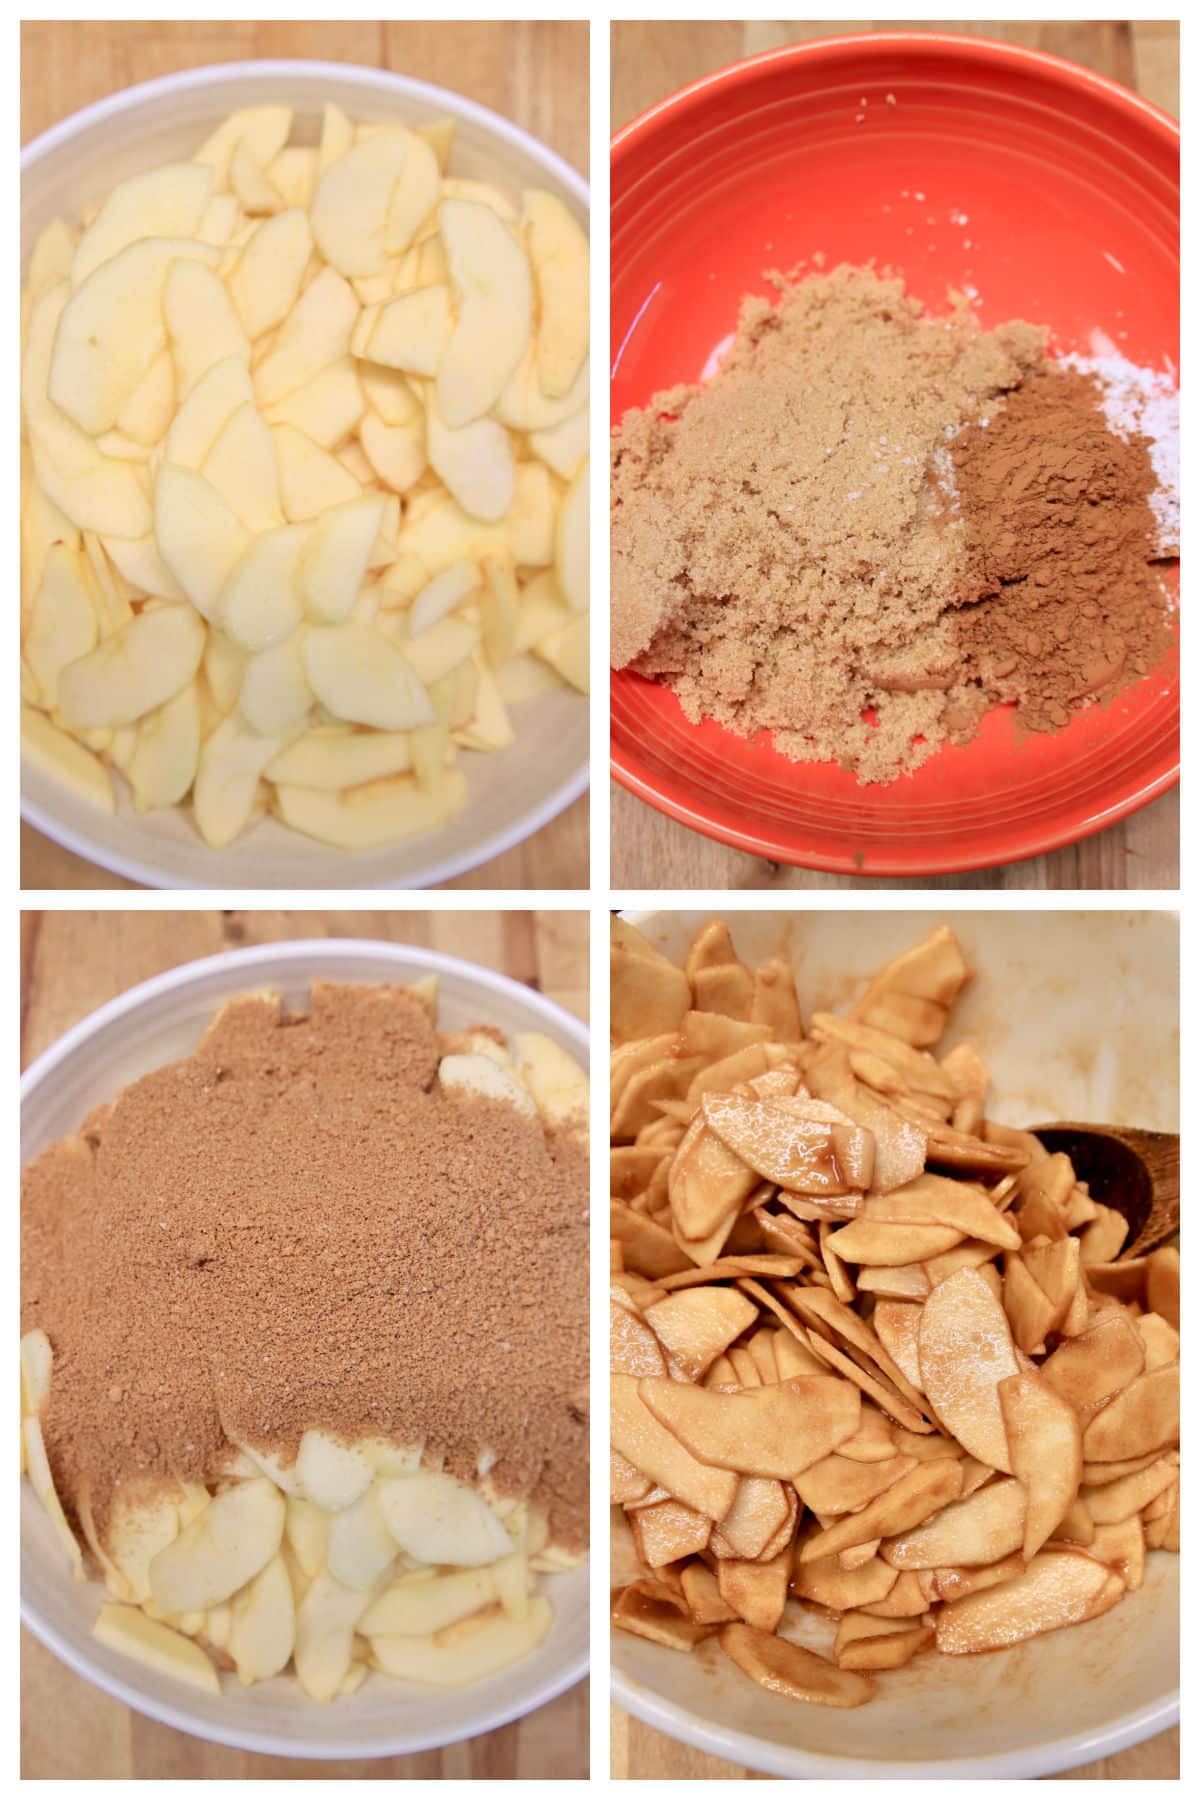 Collage: sliced apples, brown sugar cinnamon in a bowl, apples with sugar, mixed.